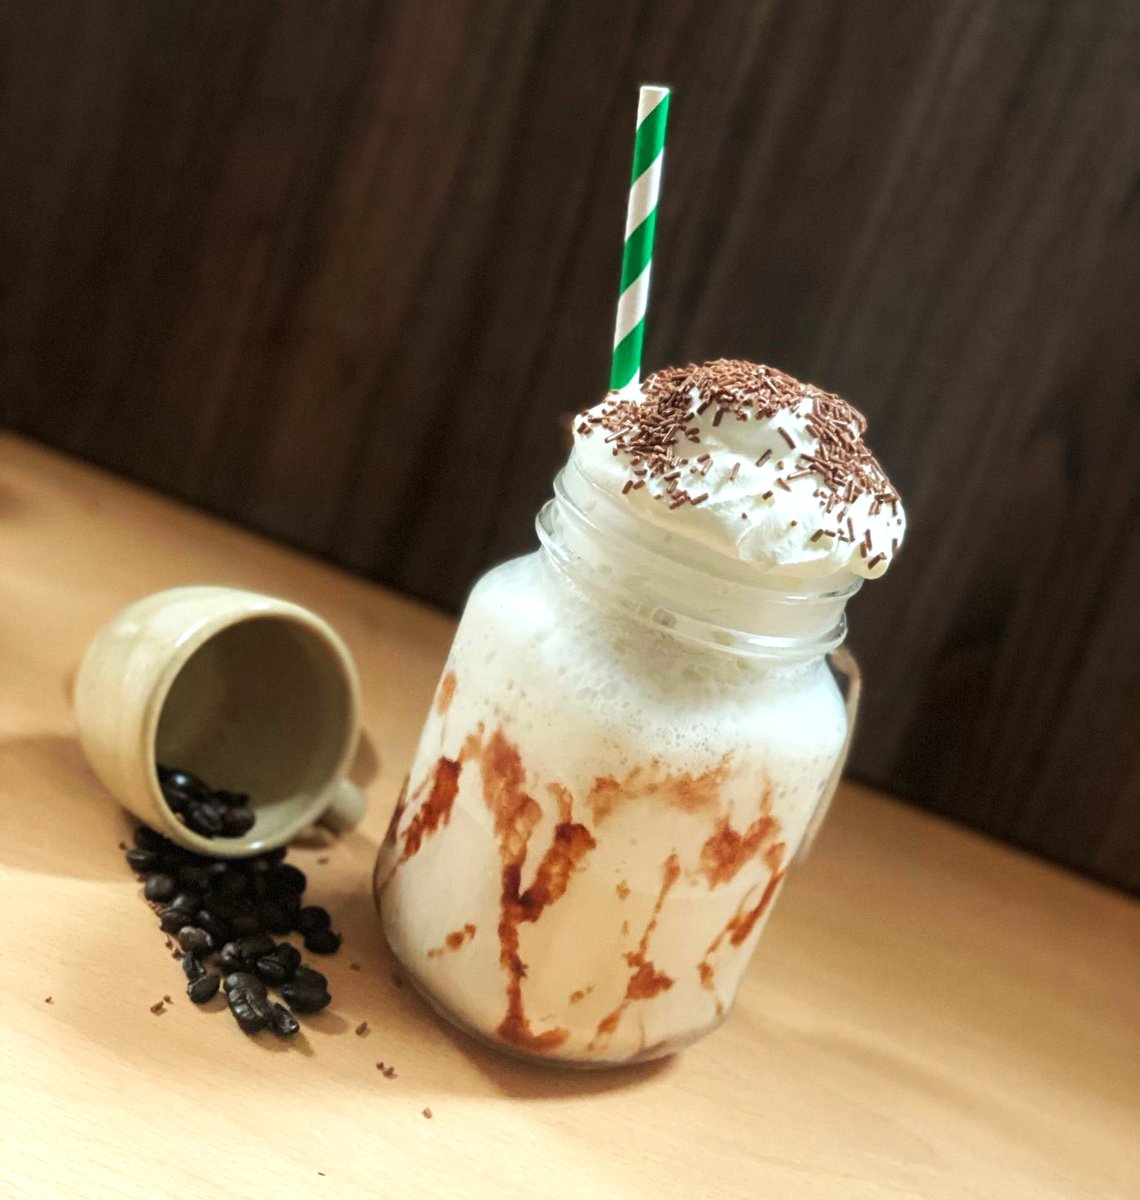 Introducing our newest milkshake flavour from the Café - Cappuccino! 😍 🤎

#milkshake #cappucinomilkshake #cafe #wiltshire #swindon #oxfordshire #rovesfarm #farmshop #butchery #daysout #sweettreat #handmade